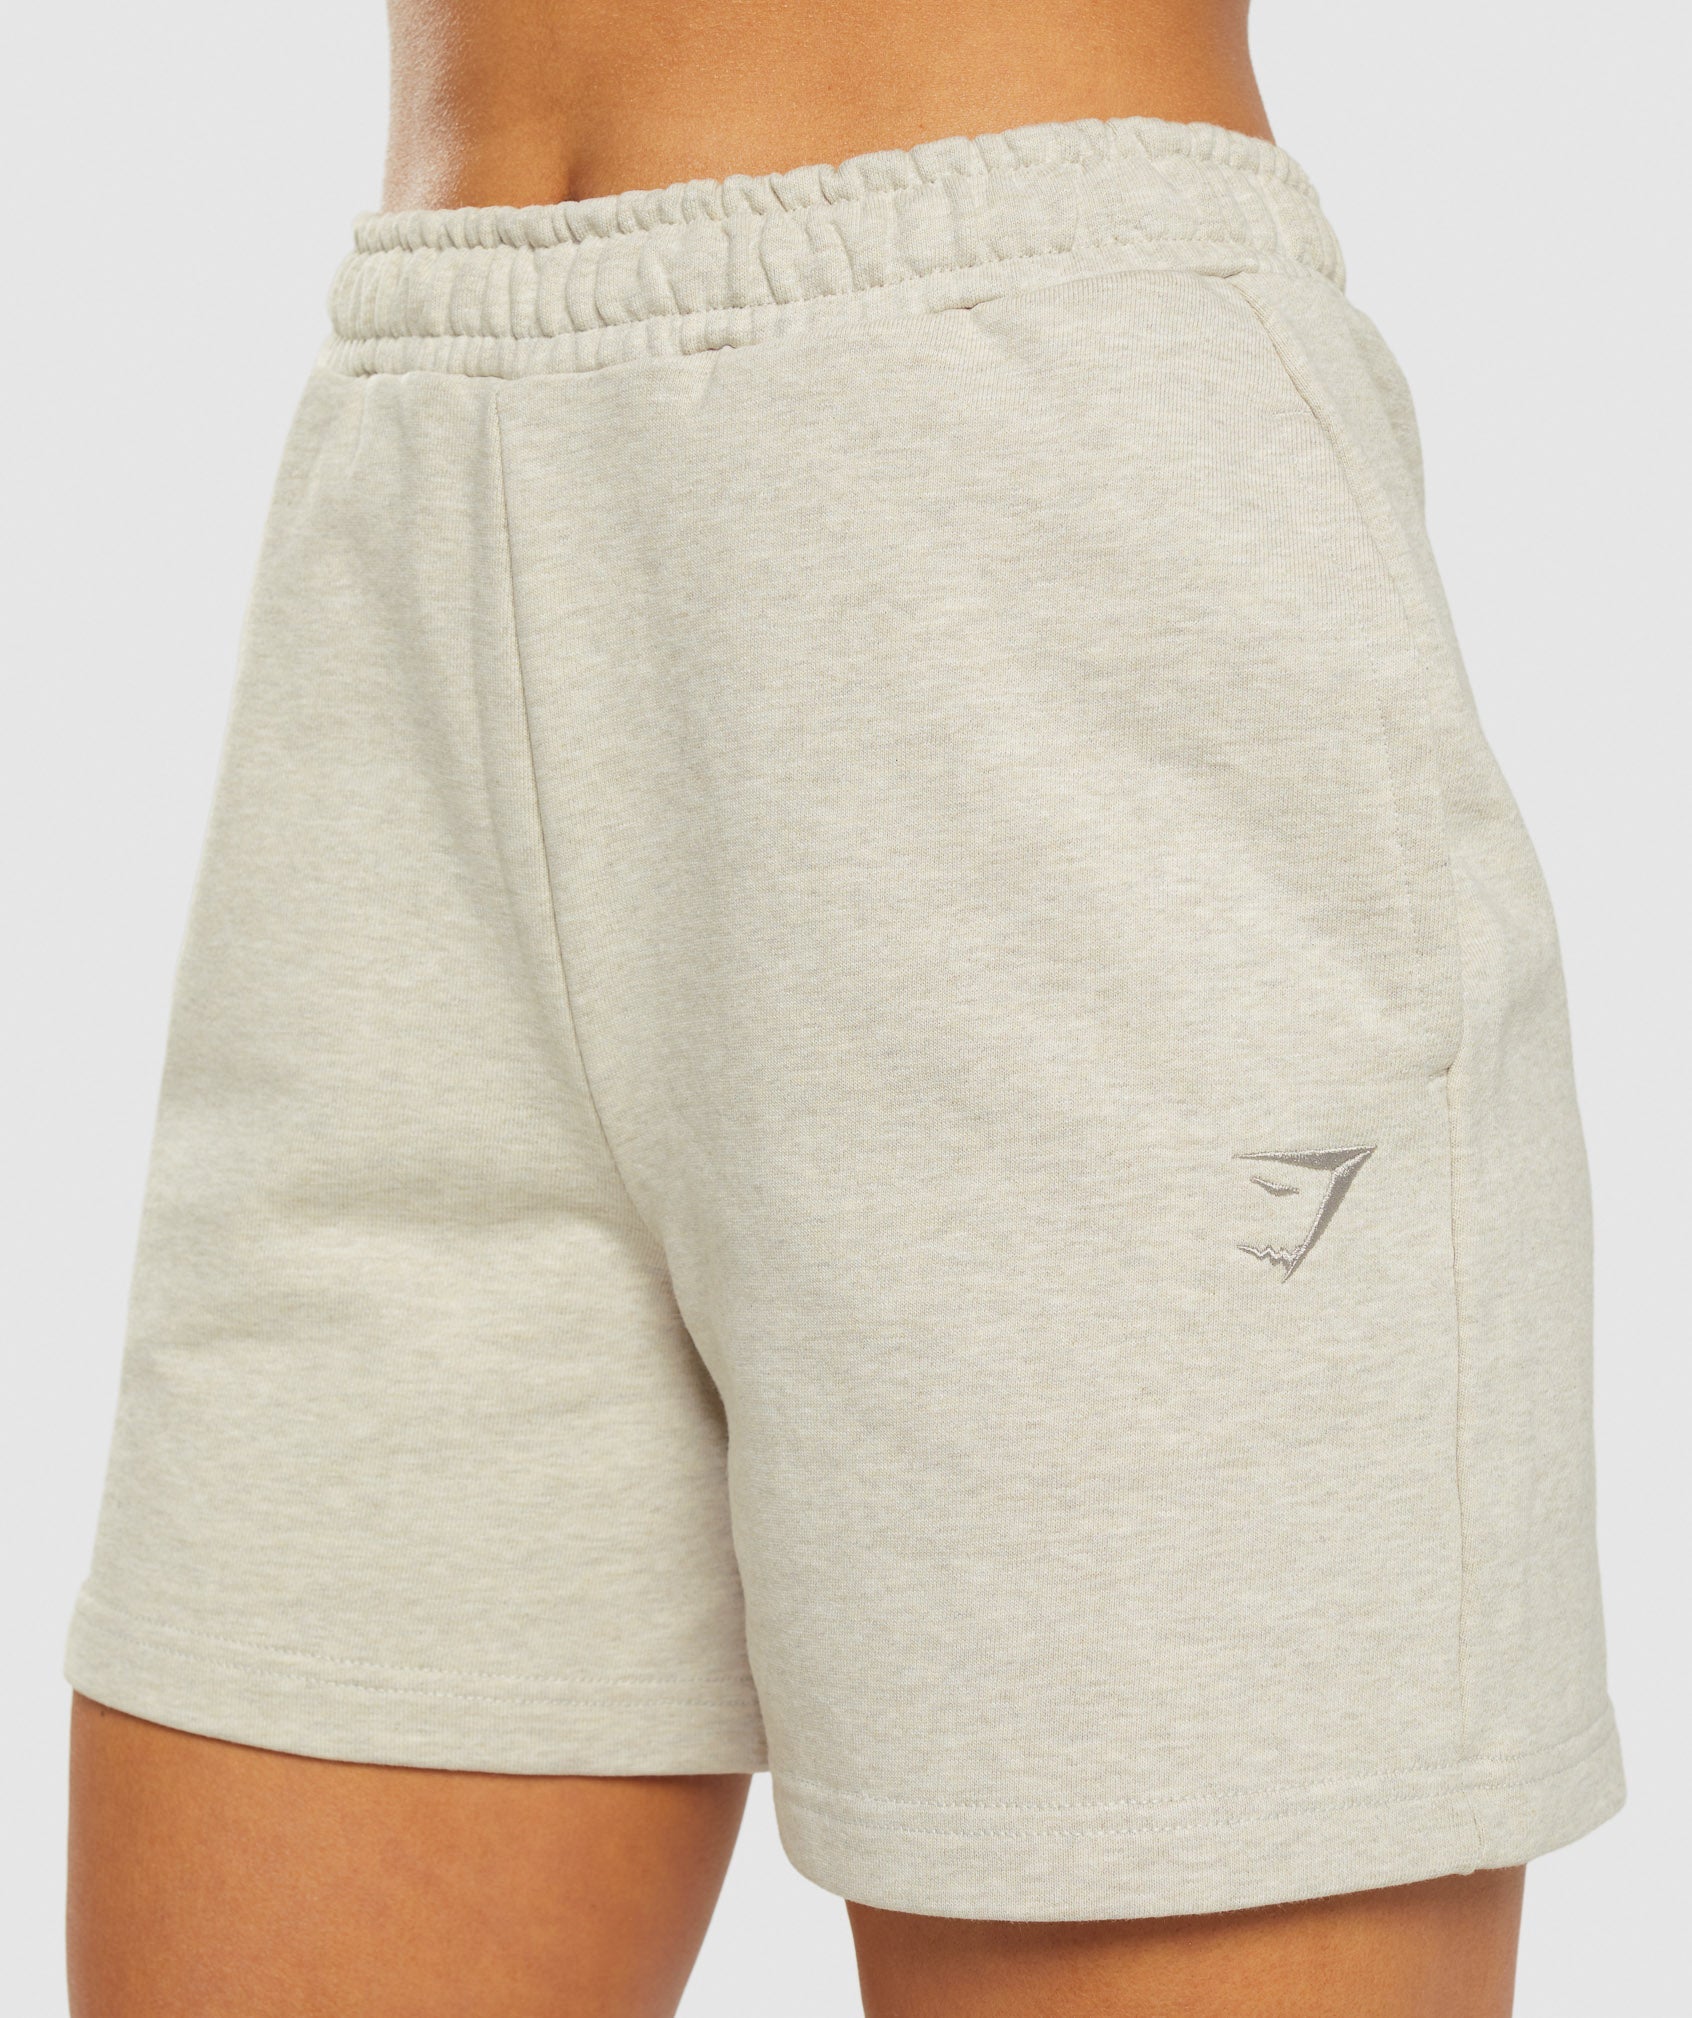 Rest Day Sweats Shorts in Sand Marl